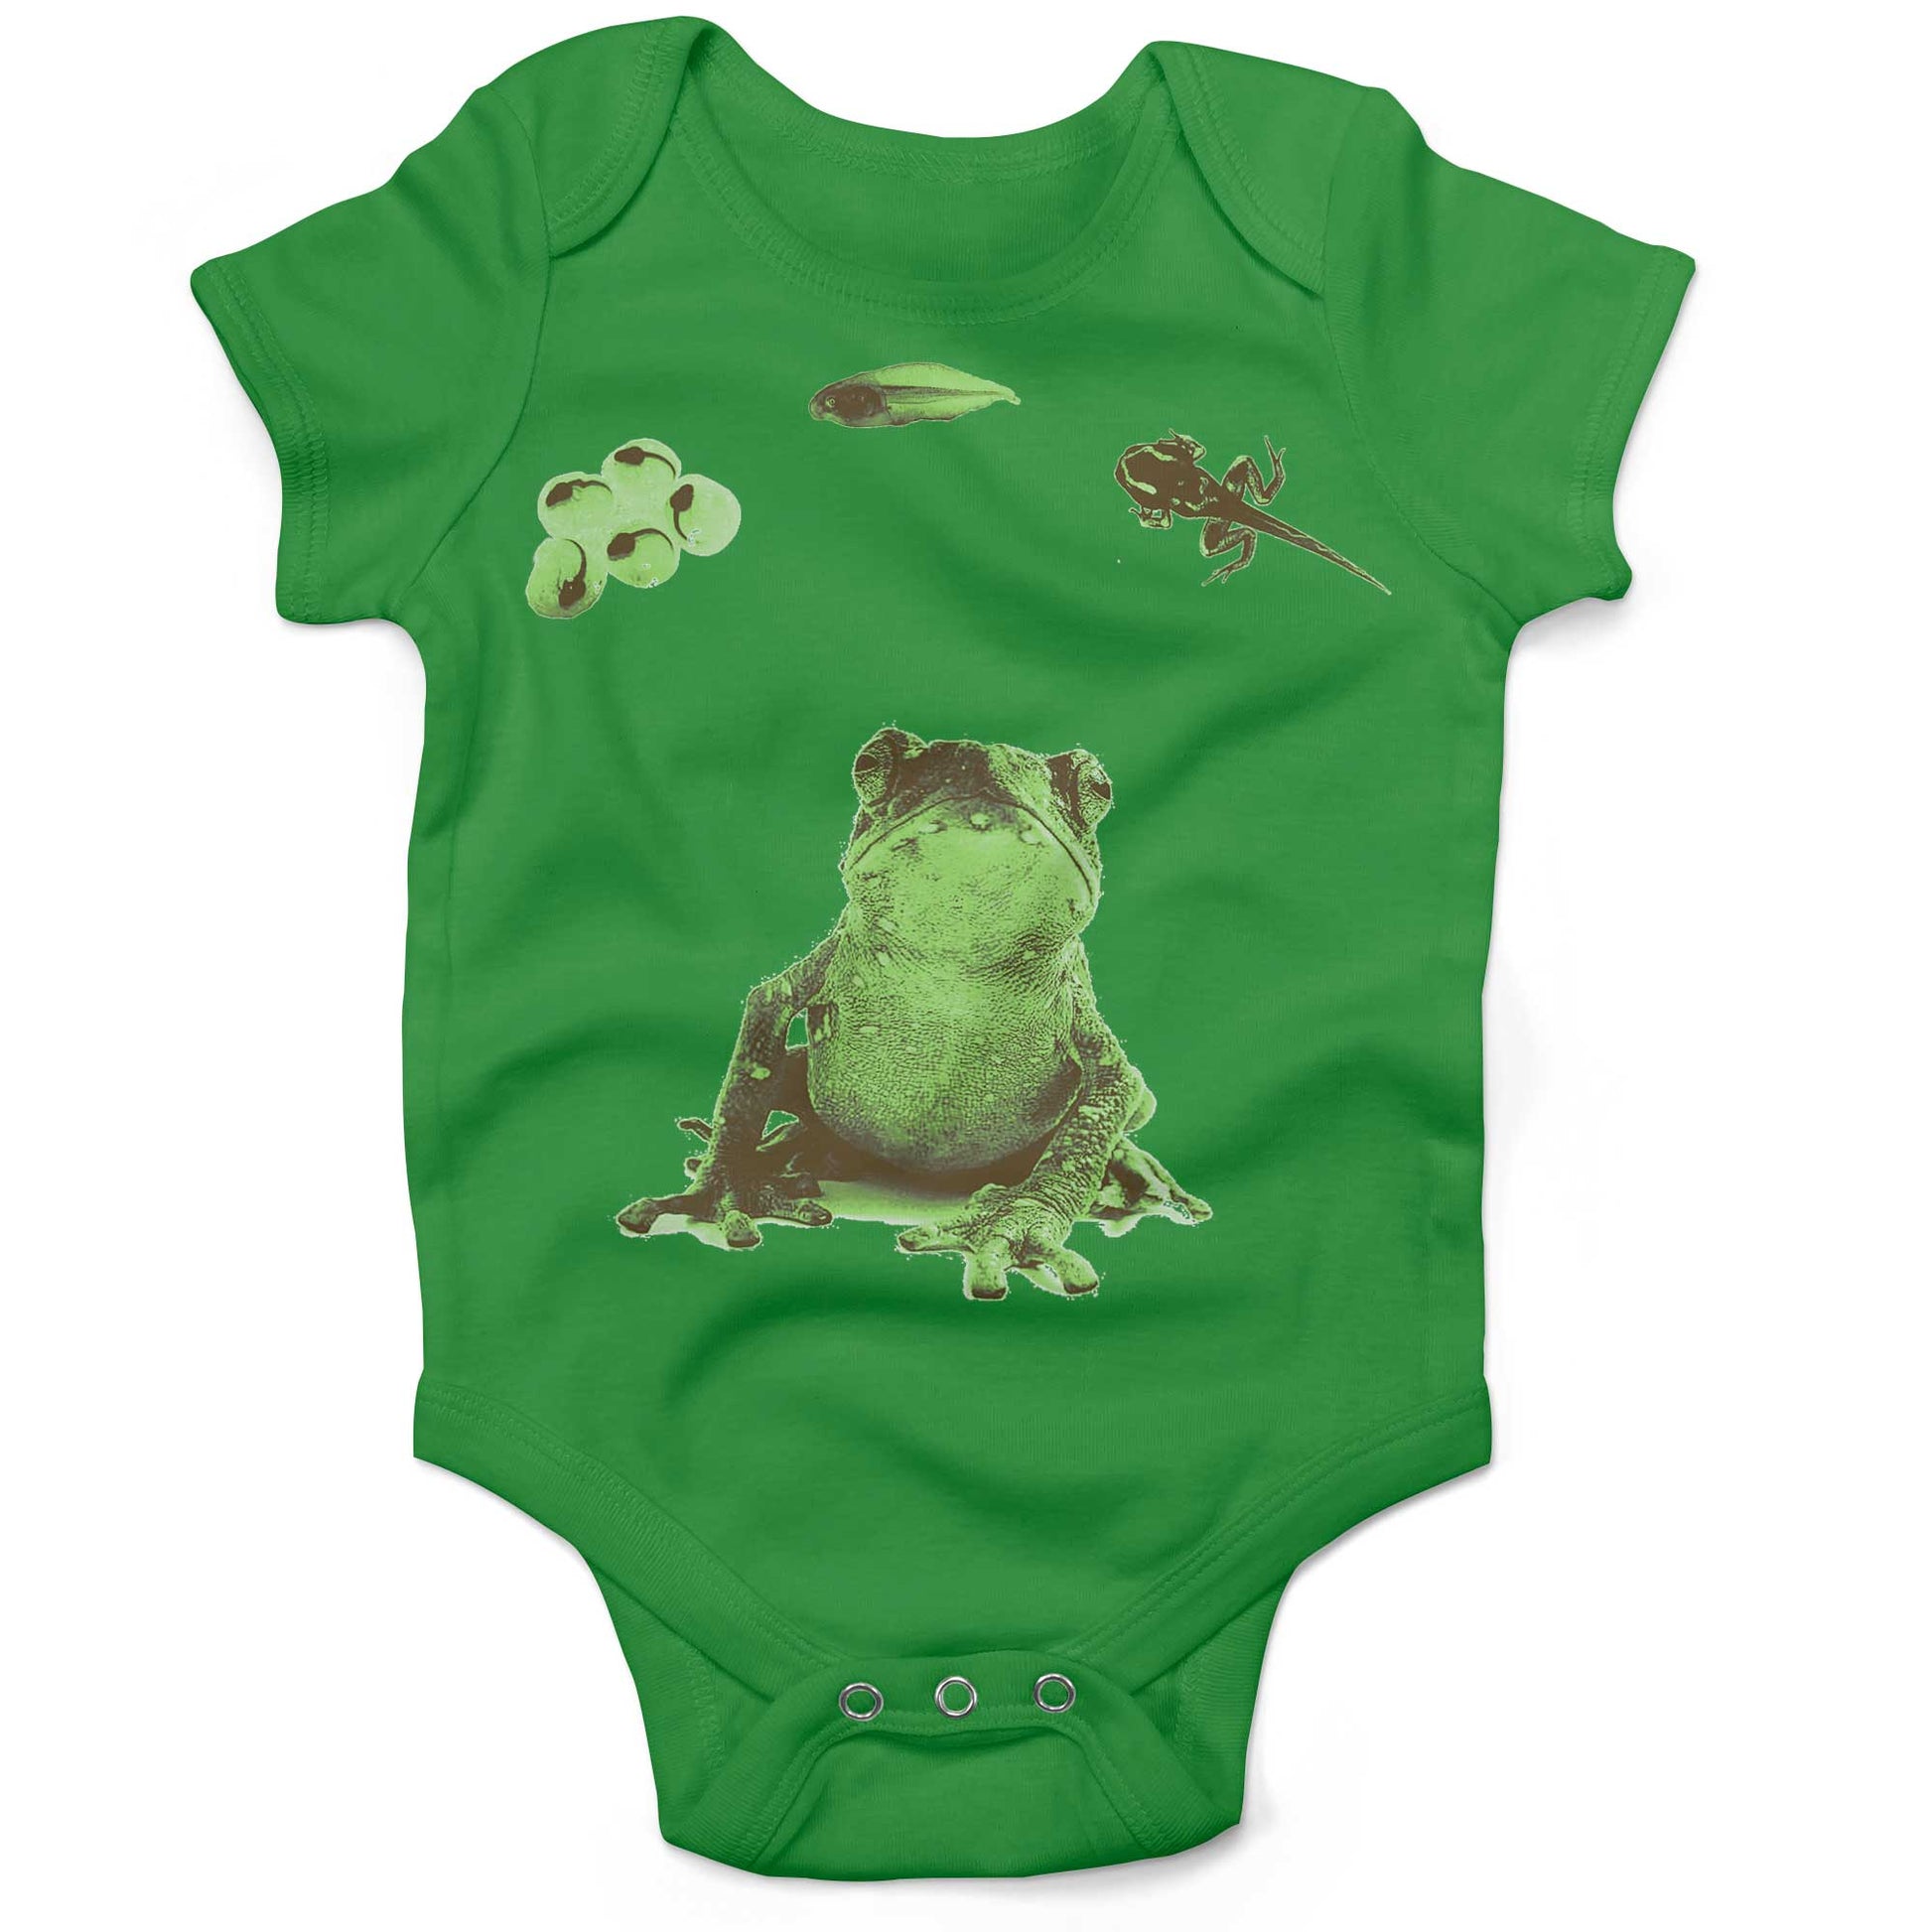 Frog Lifecycle Infant Bodysuit or Raglan Baby Tee-Grass Green-3-6 months